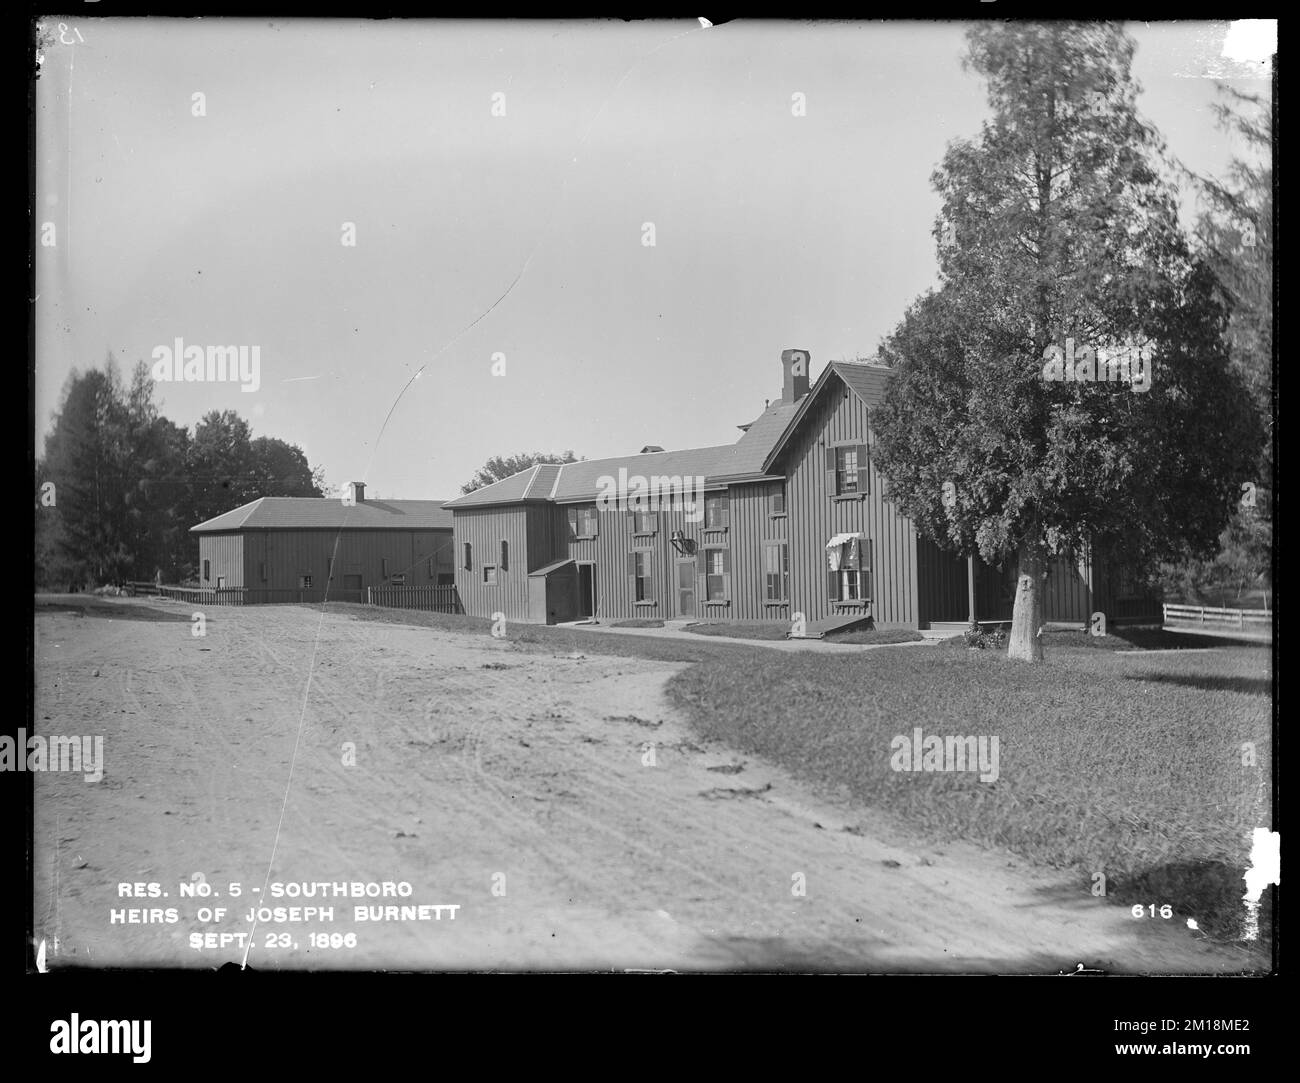 Sudbury Reservoir, Heirs of Joseph Burnett's Deerfoot Farm, slaughterhouse, from the east, Southborough, Mass., Sep. 23, 1896 , waterworks, reservoirs water distribution structures, real estate Stock Photo